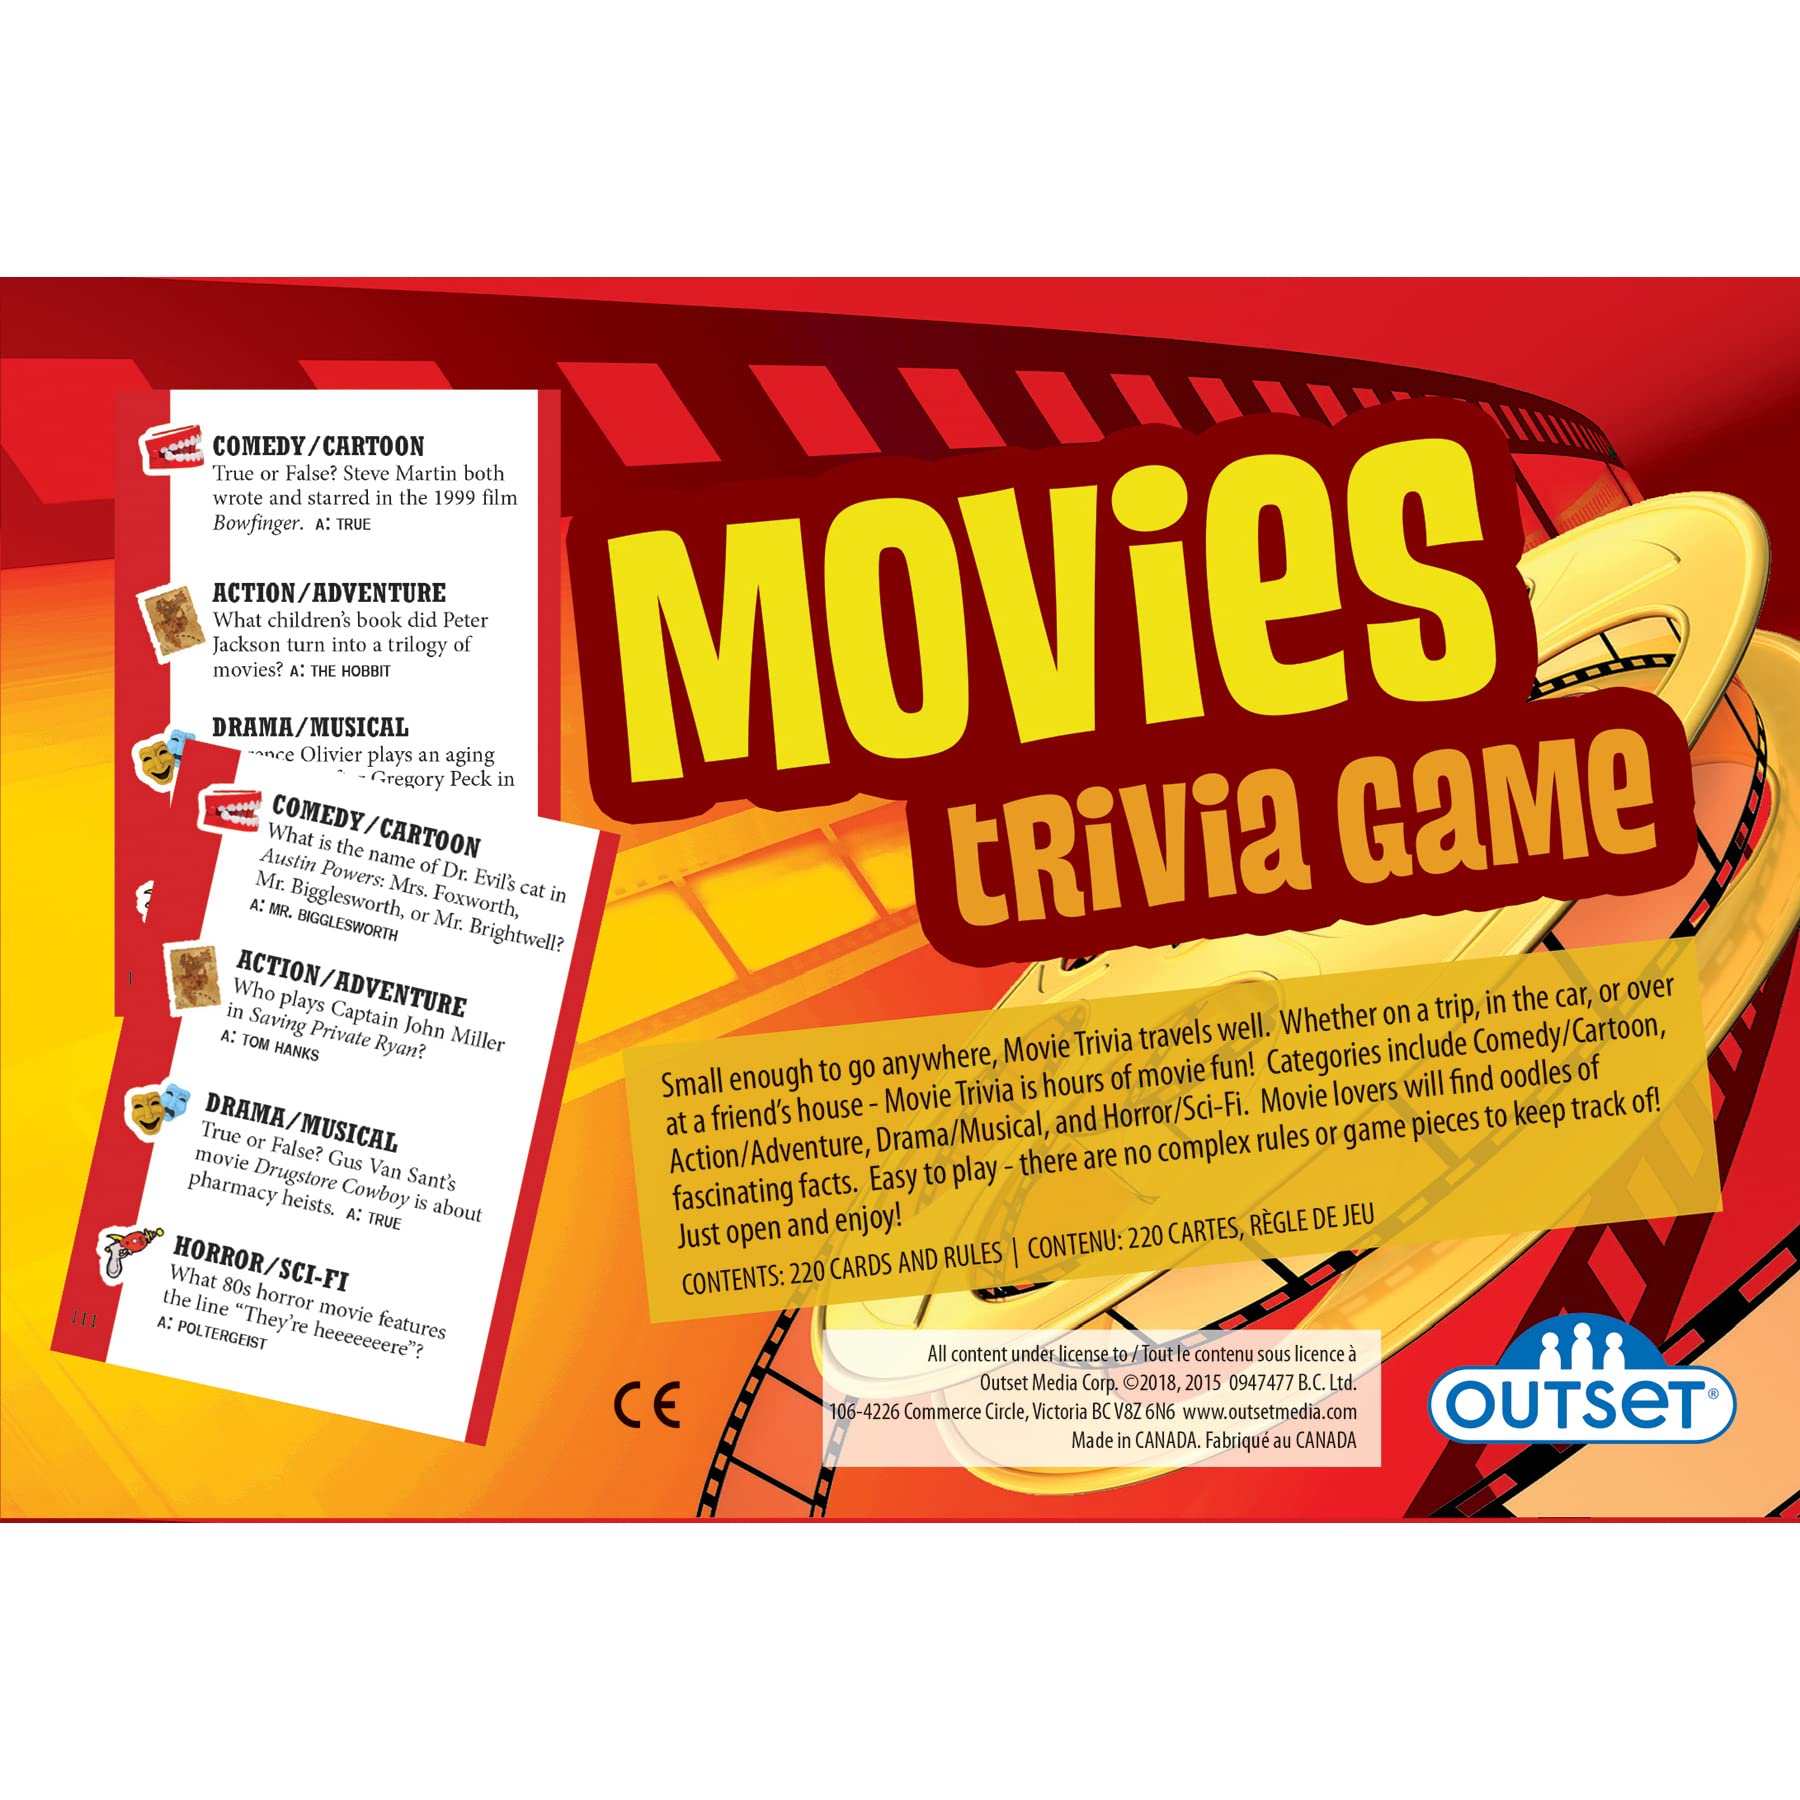 Movies Trivia Game - Party Game - Family Game - Travel Game - Fun and Easy to Play - 1200 Trivia Questions - for 2 or More Players - Ages 12+